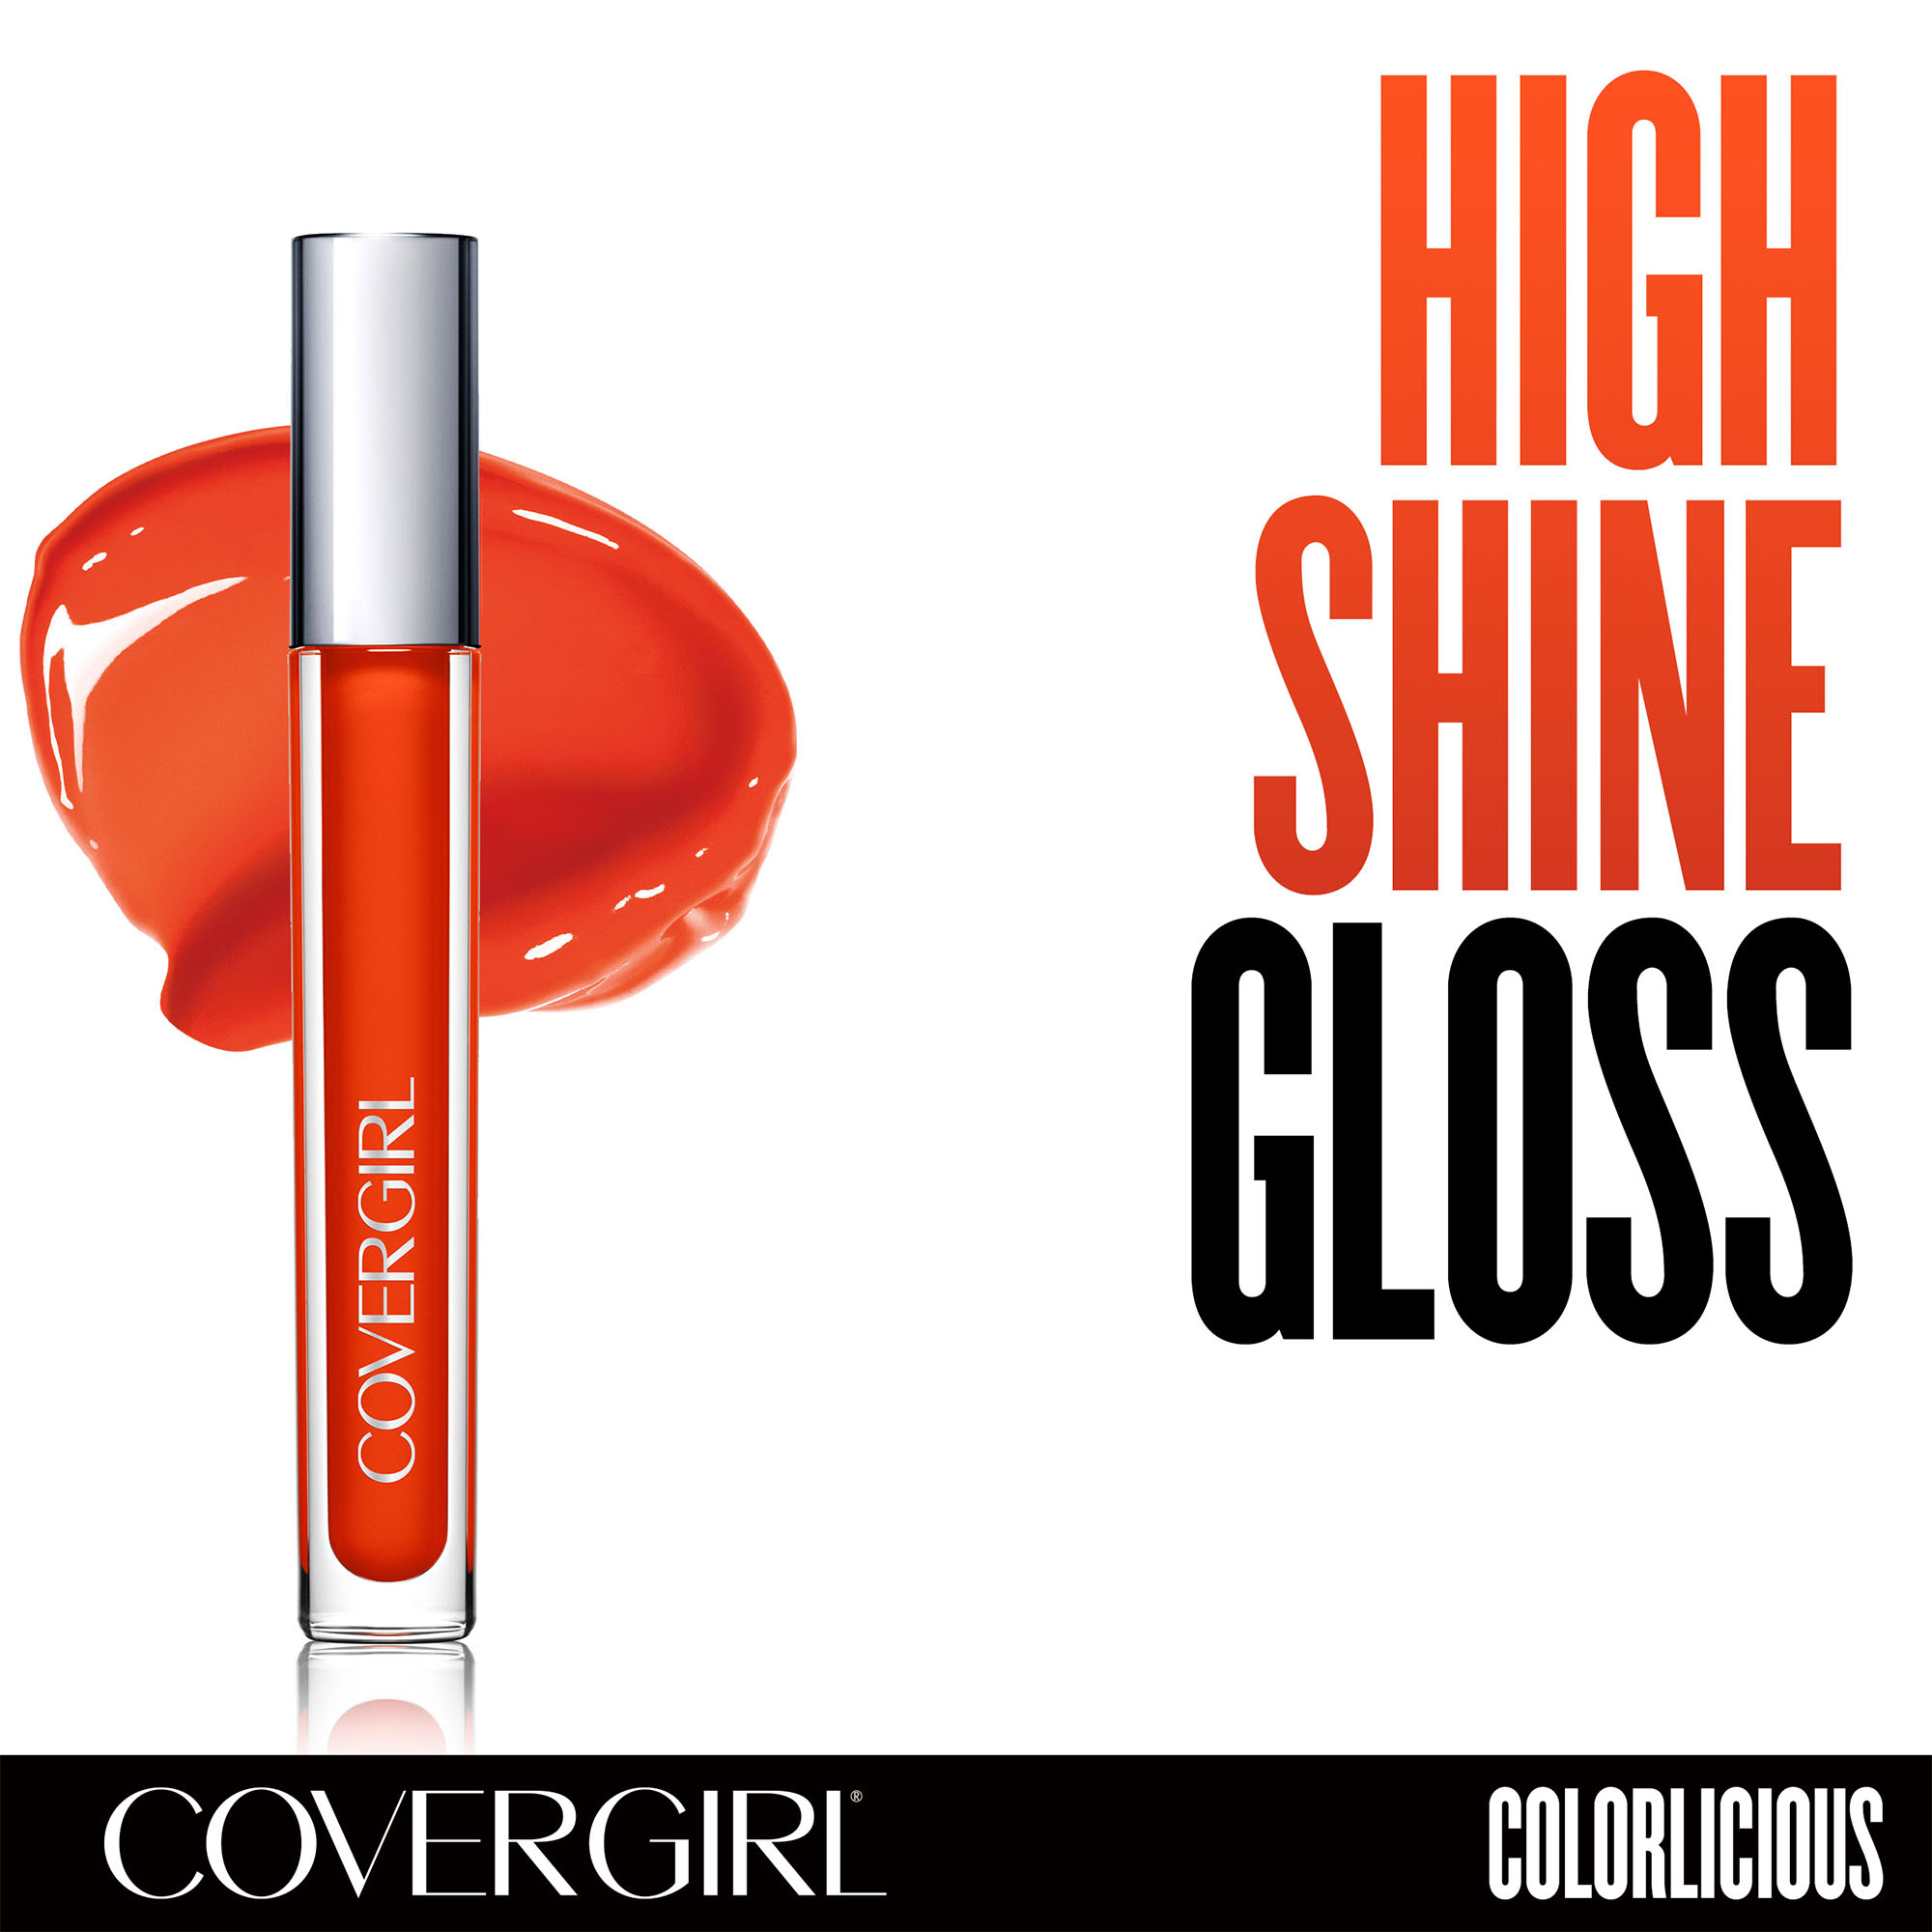 COVERGIRL Colorlicious High Shine Lip Gloss, 670 Succulent Citrus - image 2 of 5